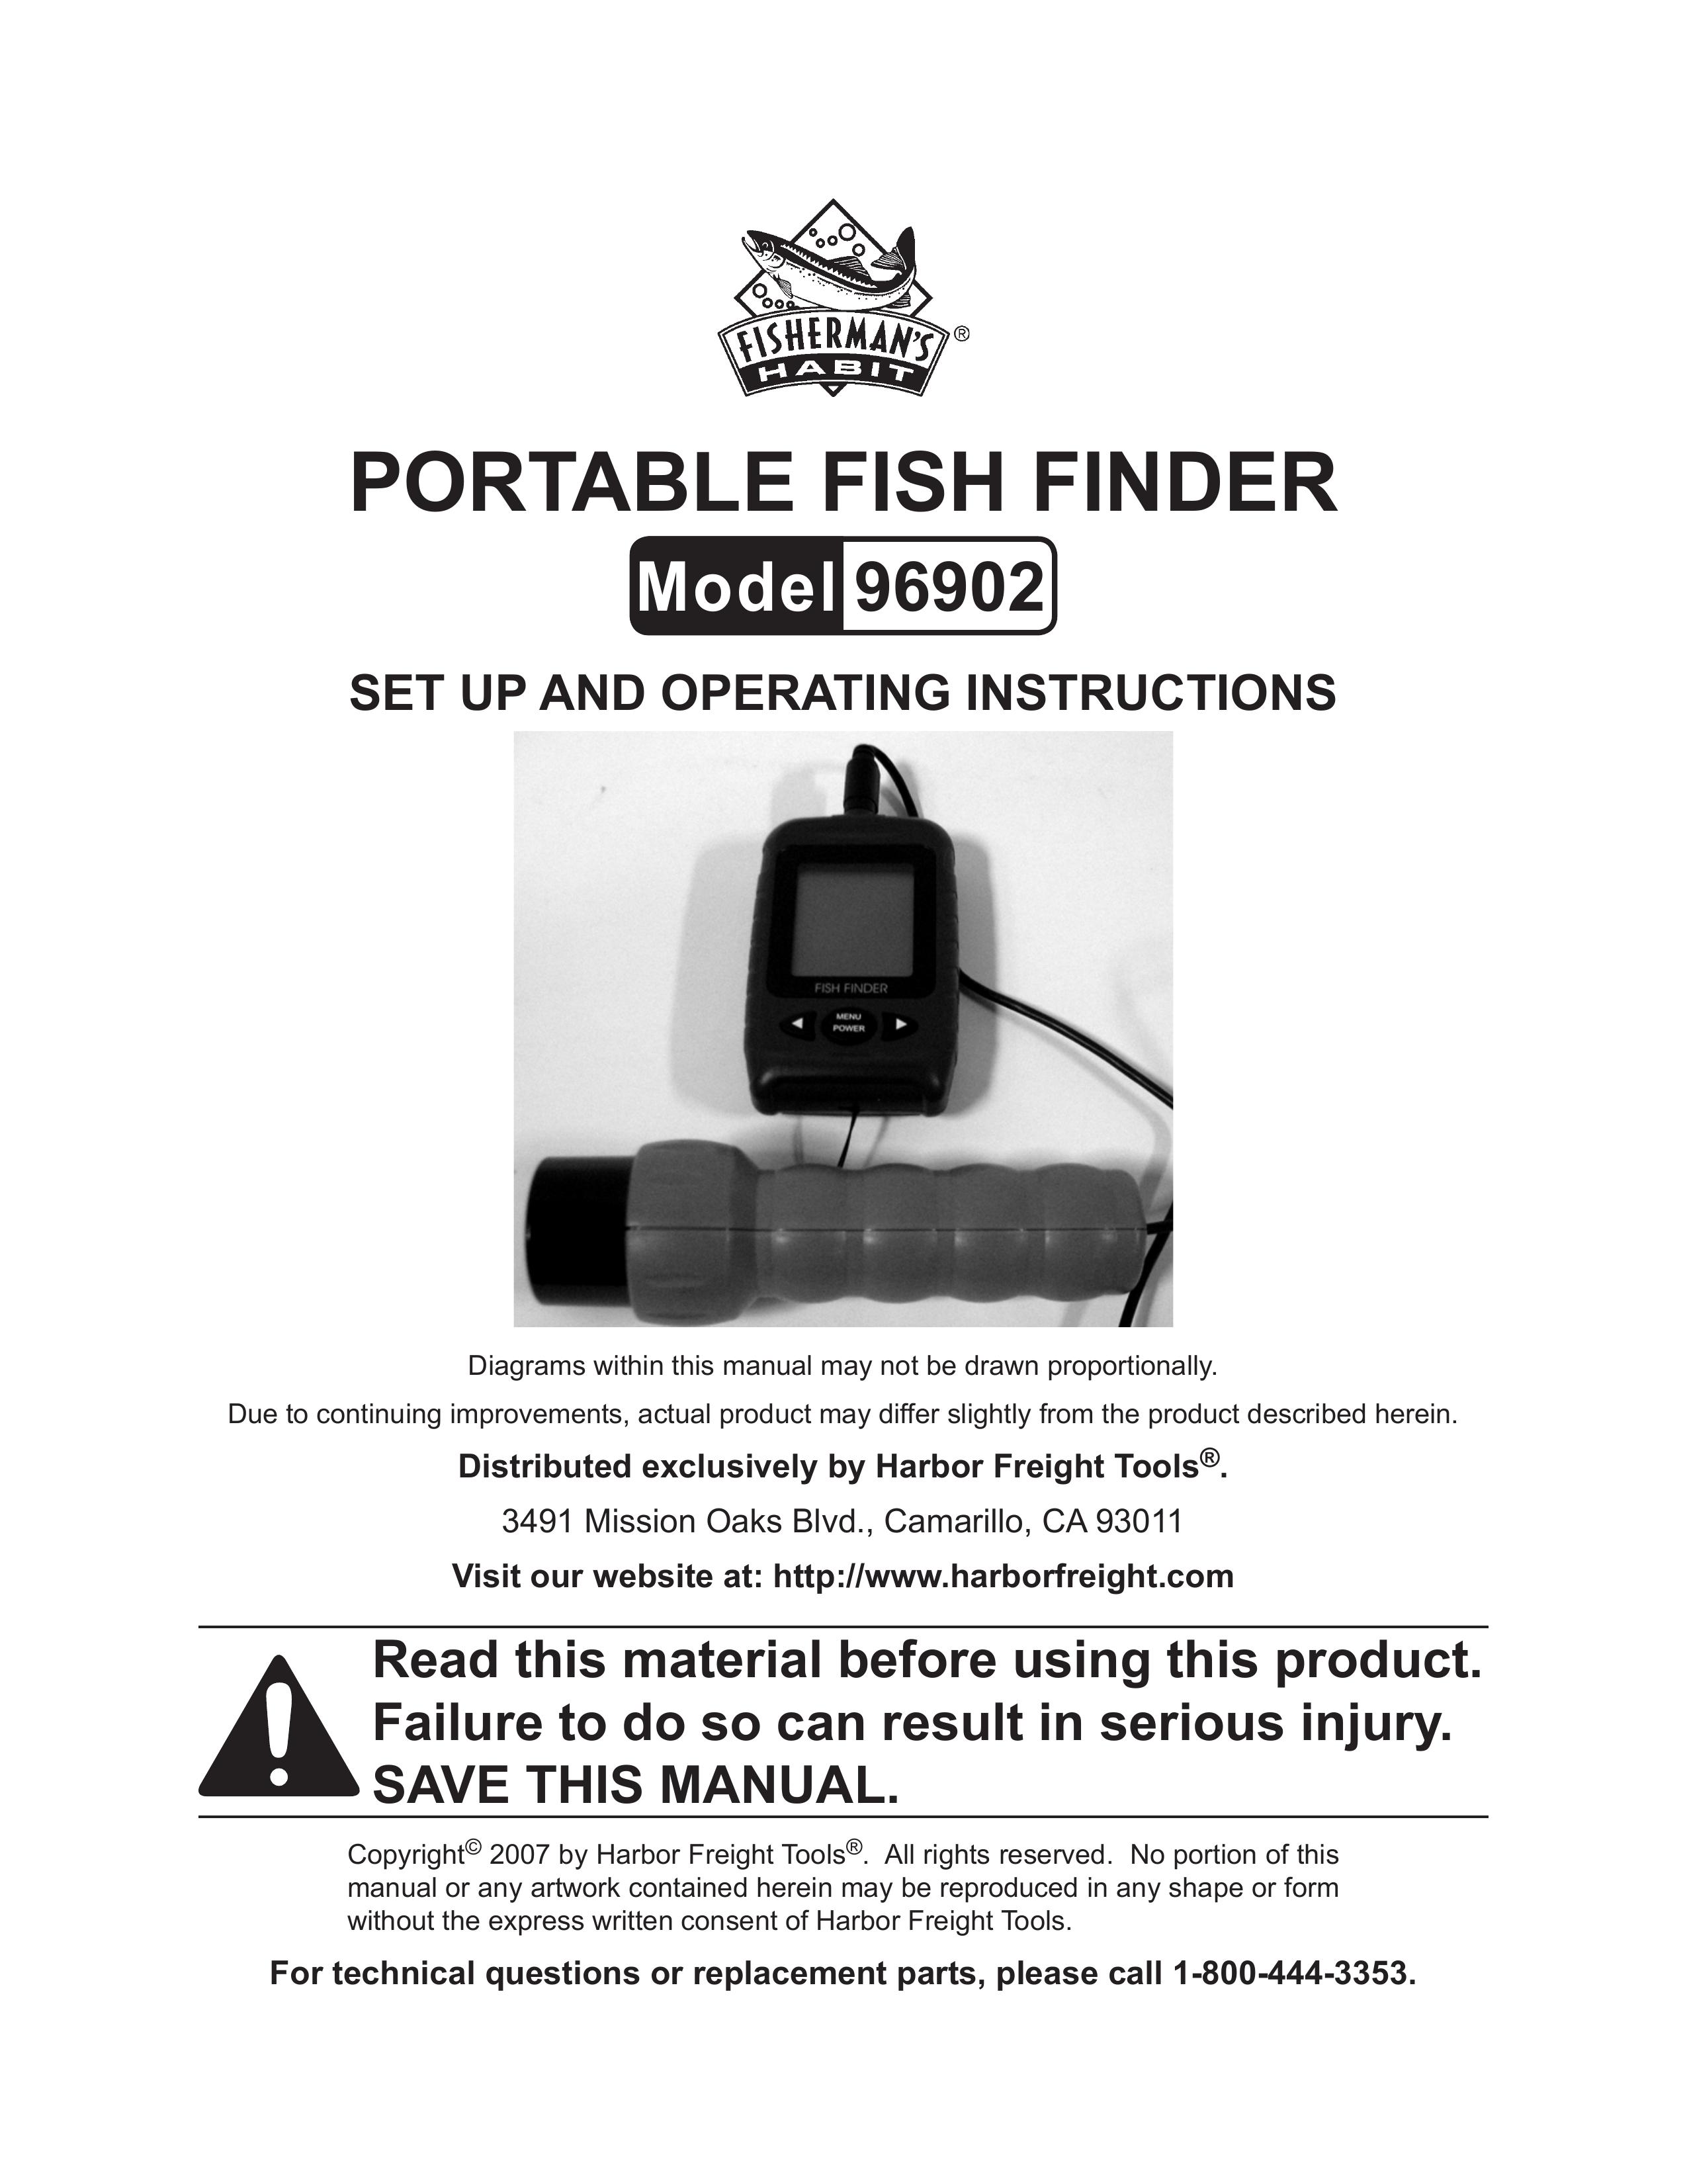 Harbor Freight Tools 96902 Fish Finder User Manual